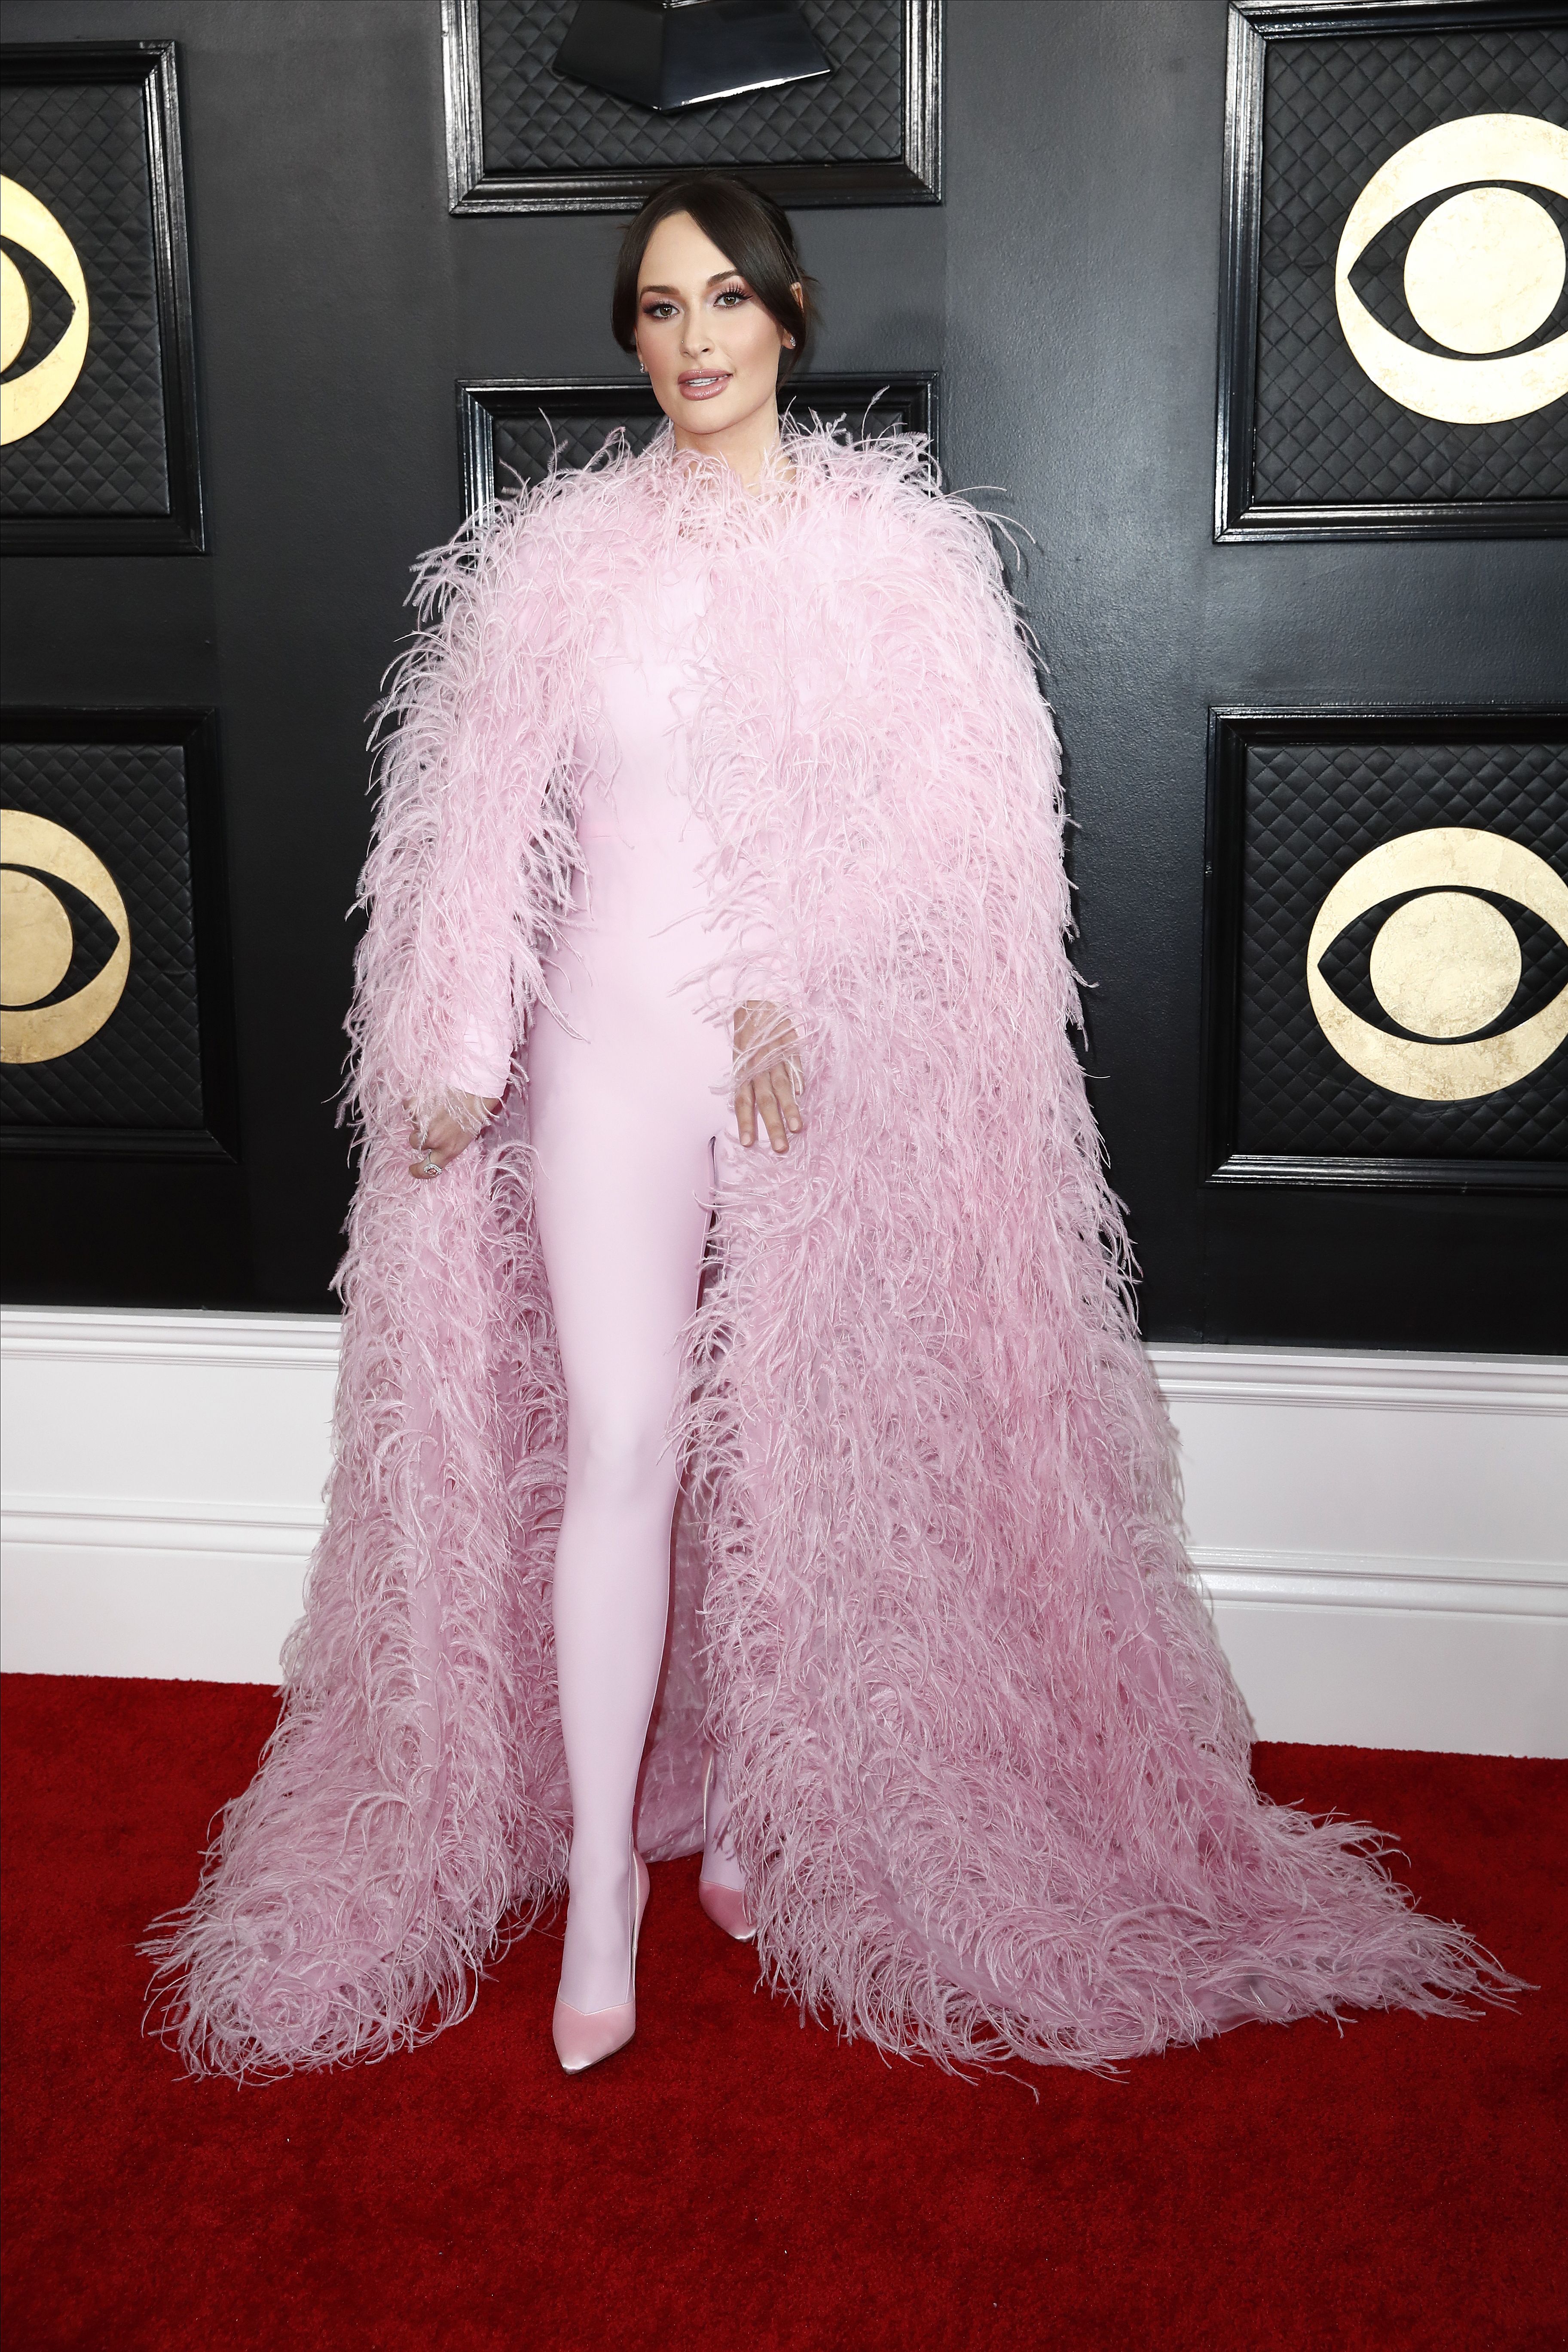 Grammys 2023: Looks From the Red Carpet - The New York Times